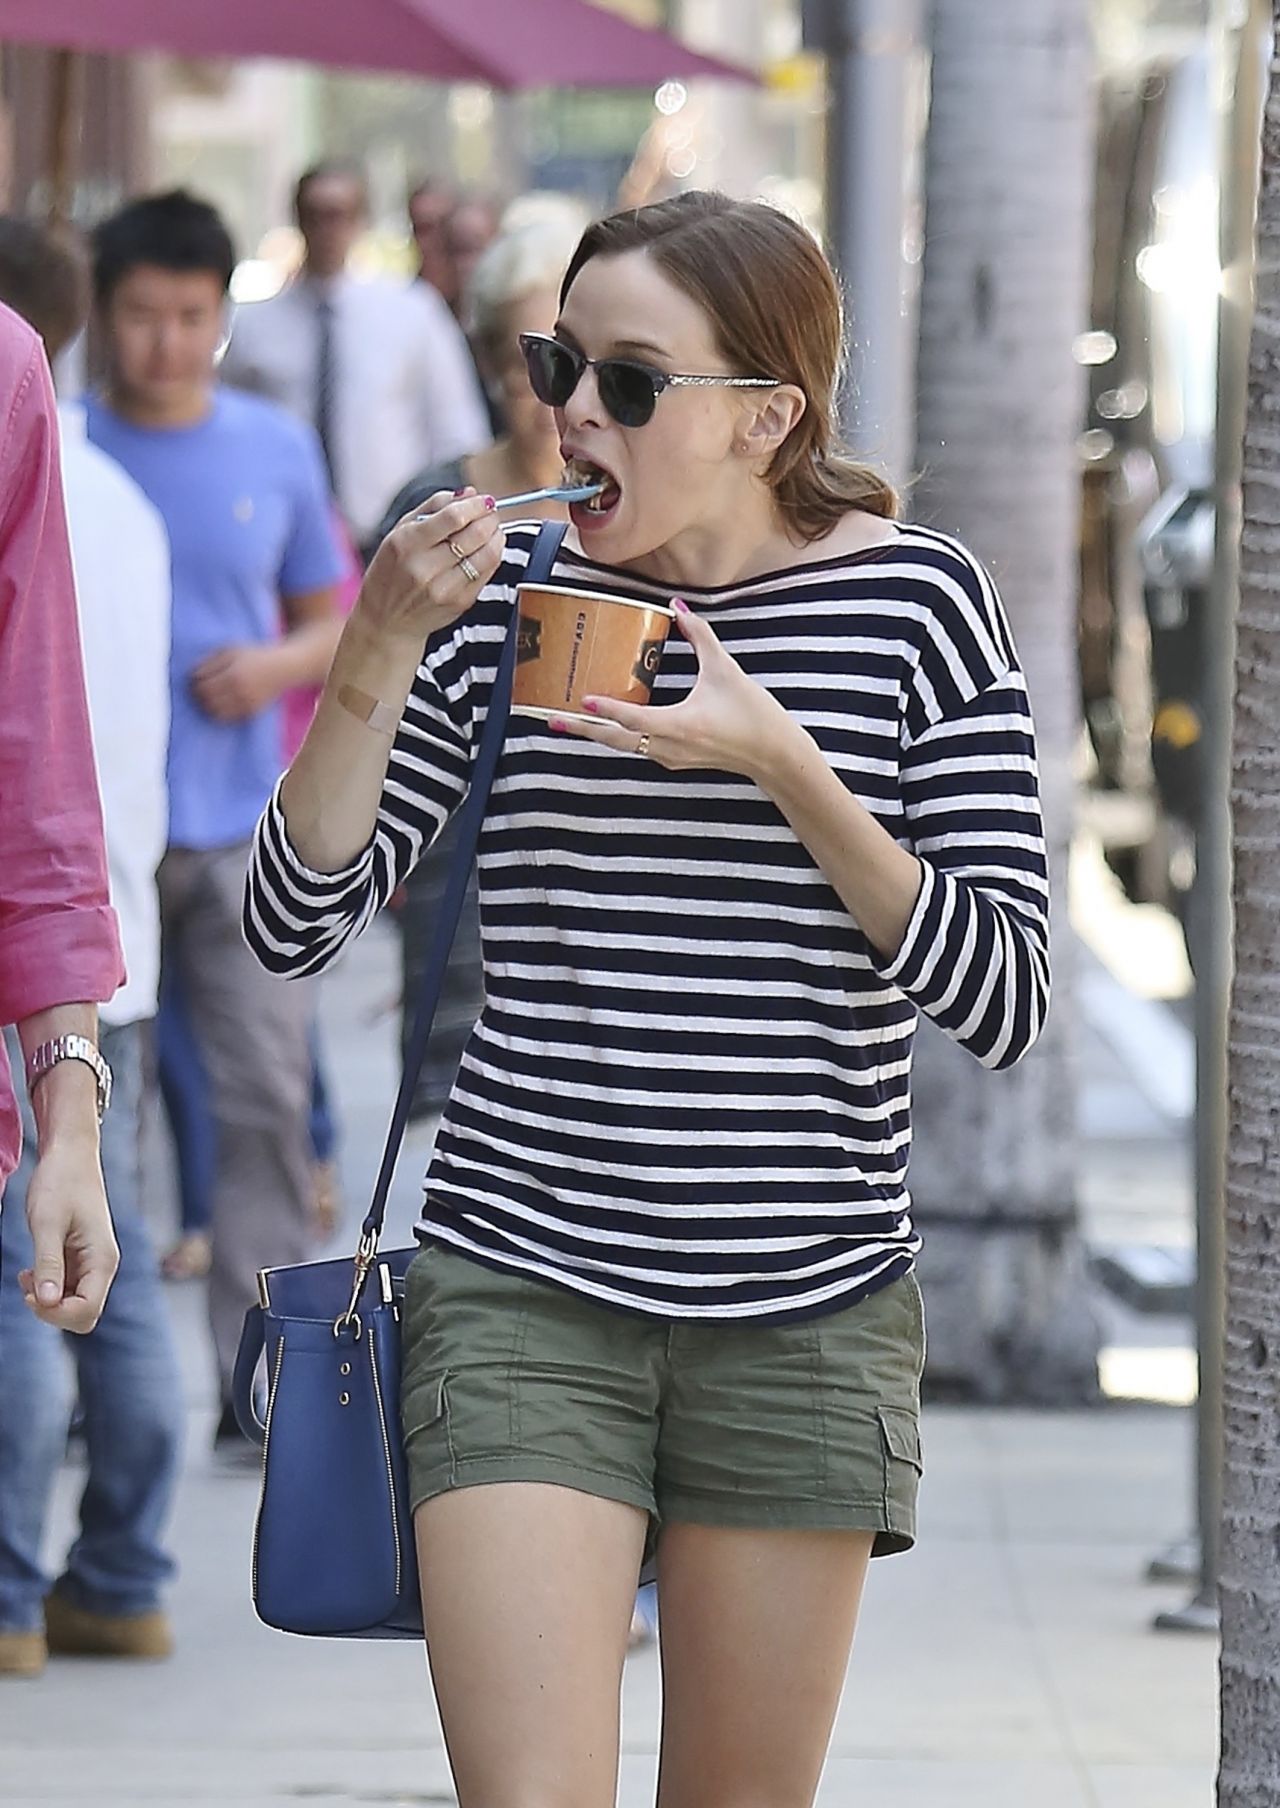 Danielle Panabaker in Shorts - Out in Beverly Hills - July 20141280 x 1808